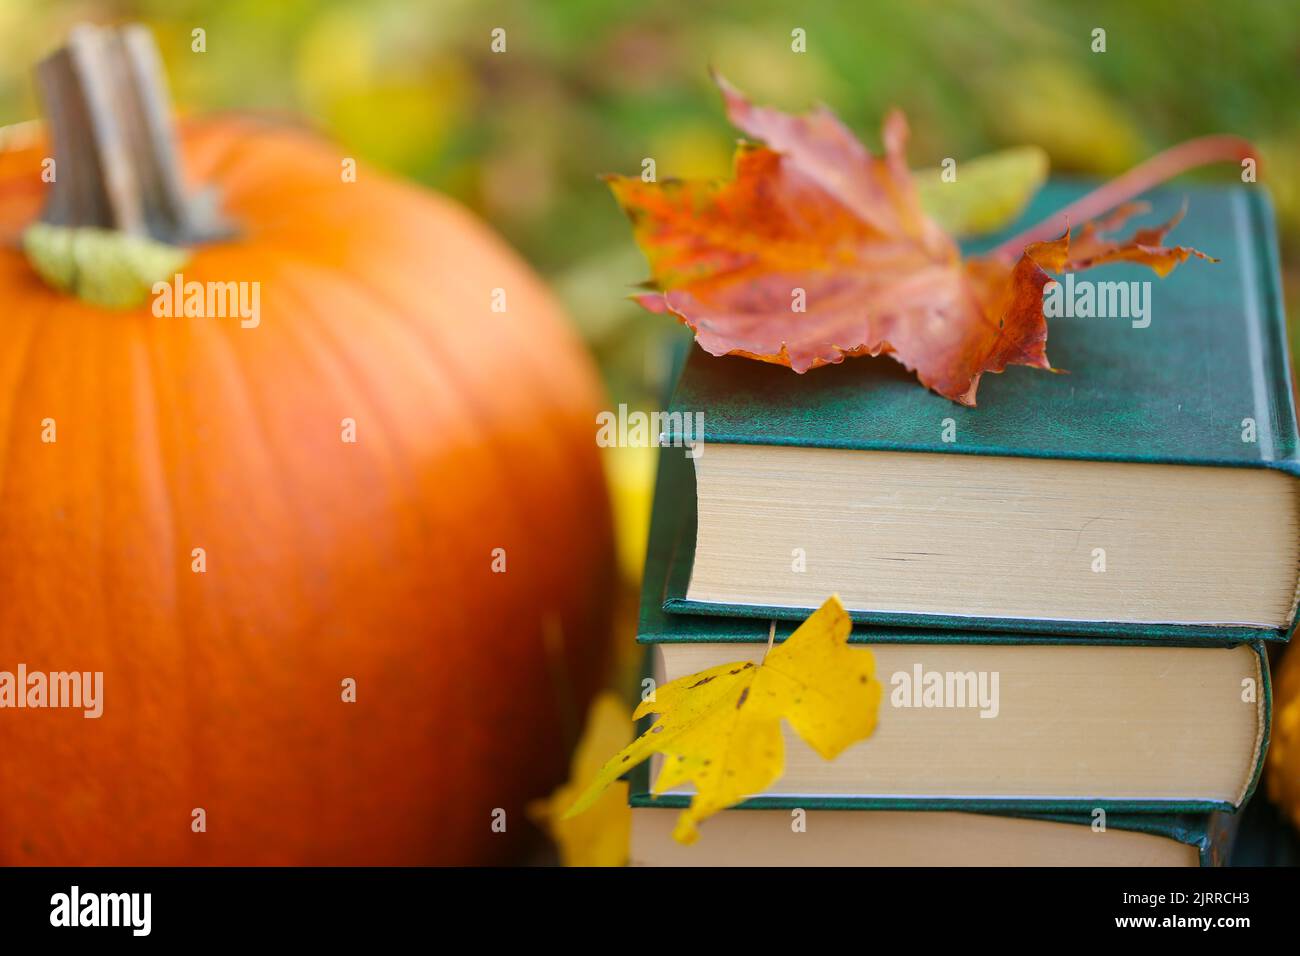 autum Books.Halloween Books.Study and education concept. stack of books,maple leaves and pumpkins in autumn garden.Autumn reading.Start school and Stock Photo